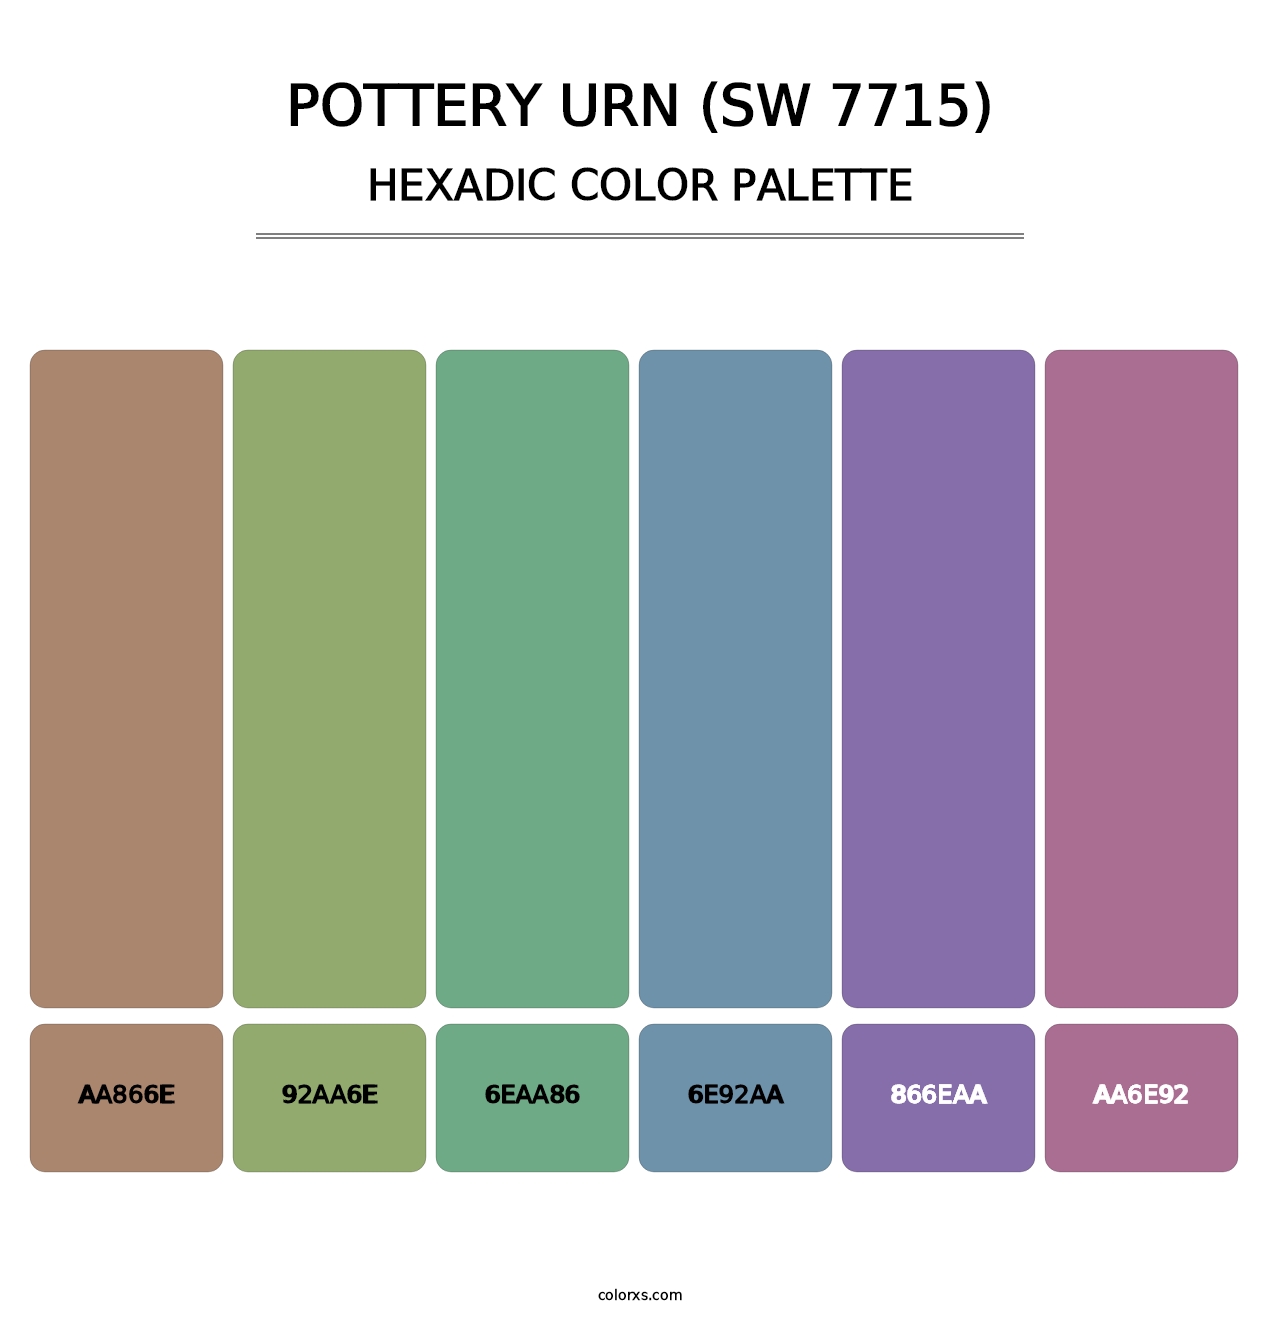 Pottery Urn (SW 7715) - Hexadic Color Palette